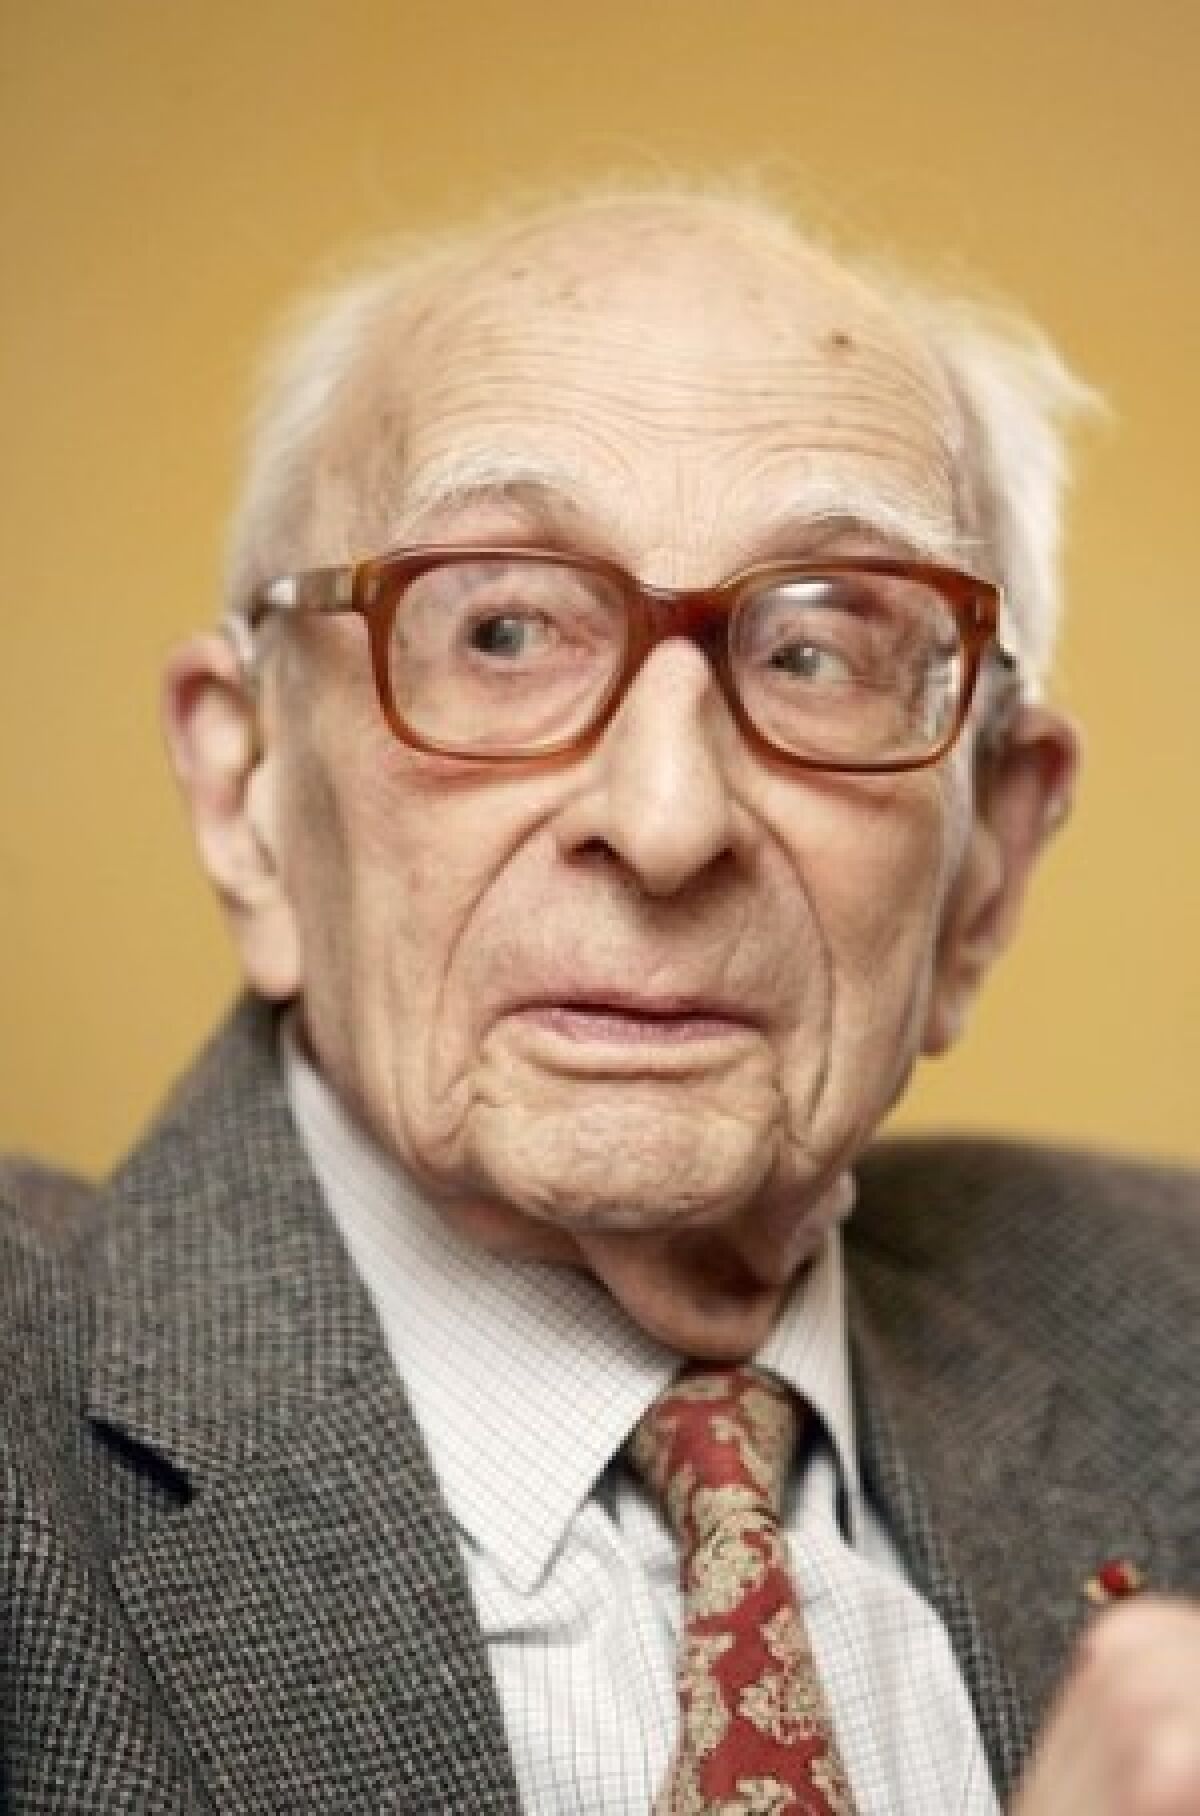 Claude Levi-Strauss, who towered over the French intellectual scene, founded the school of thought known as structuralism.